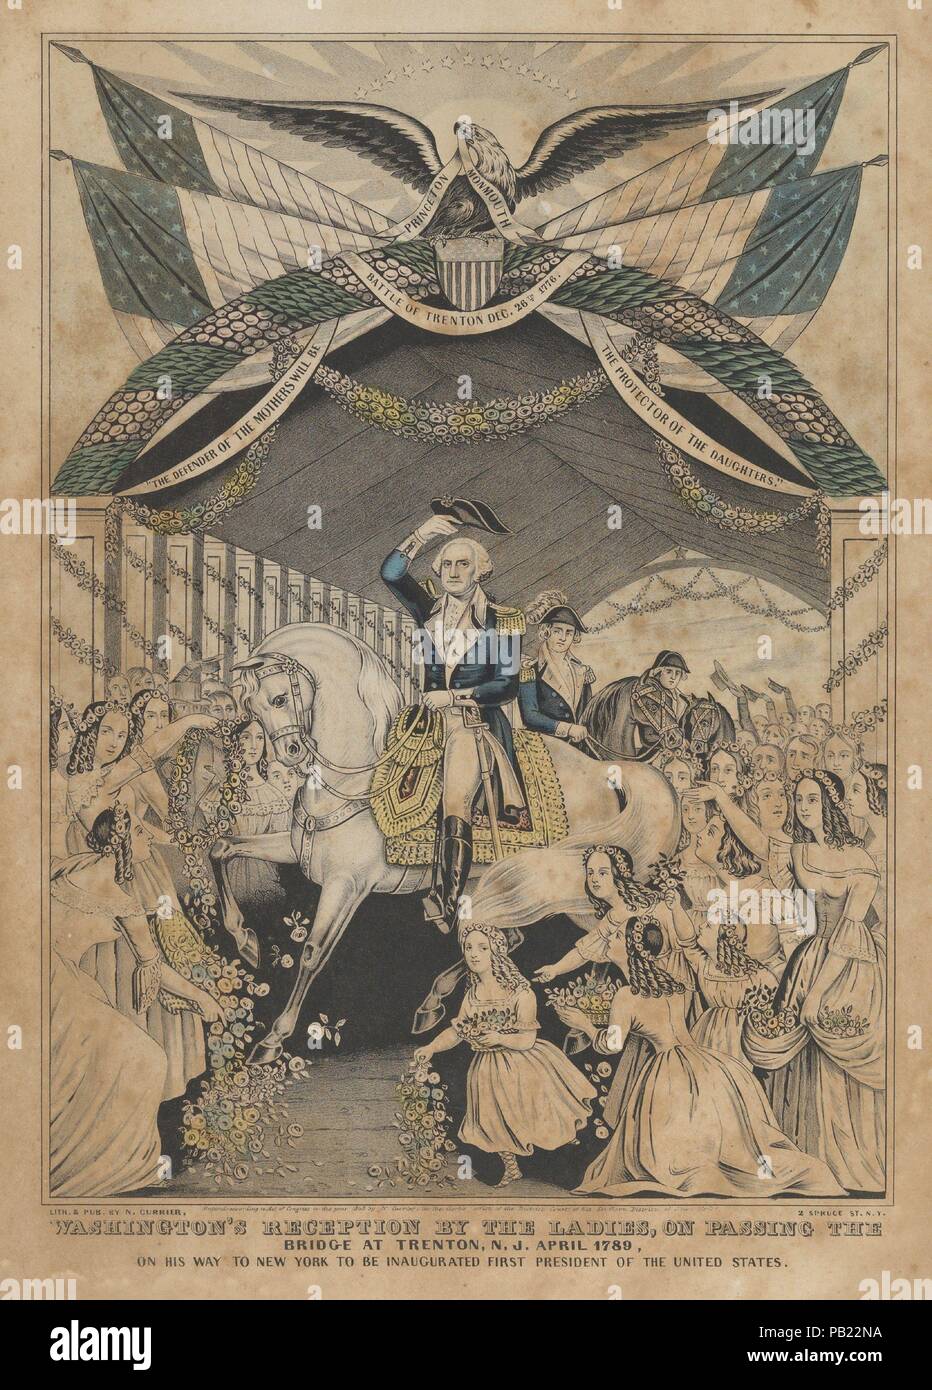 Washington's Reception by the Ladies on Passing the Bridge at Trenton, N.J., April 1789, on His Way to be Inaugurated First President of the United States. Dimensions: Image: 12 in. × 8 9/16 in. (30.5 × 21.8 cm)  Sheet: 16 1/8 × 12 5/16 in. (41 × 31.2 cm). Publisher: Lithographed and published by Nathaniel Currier (American, Roxbury, Massachusetts 1813-1888 New York). Sitter: Portrait of George Washington (American, 1732-1799). Date: 1845.  George Washington on horseback, accompanied by other gentlemen, is greeted by ladies bearing flowers as he rides over the bridge at Trenton. Banners bear t Stock Photo